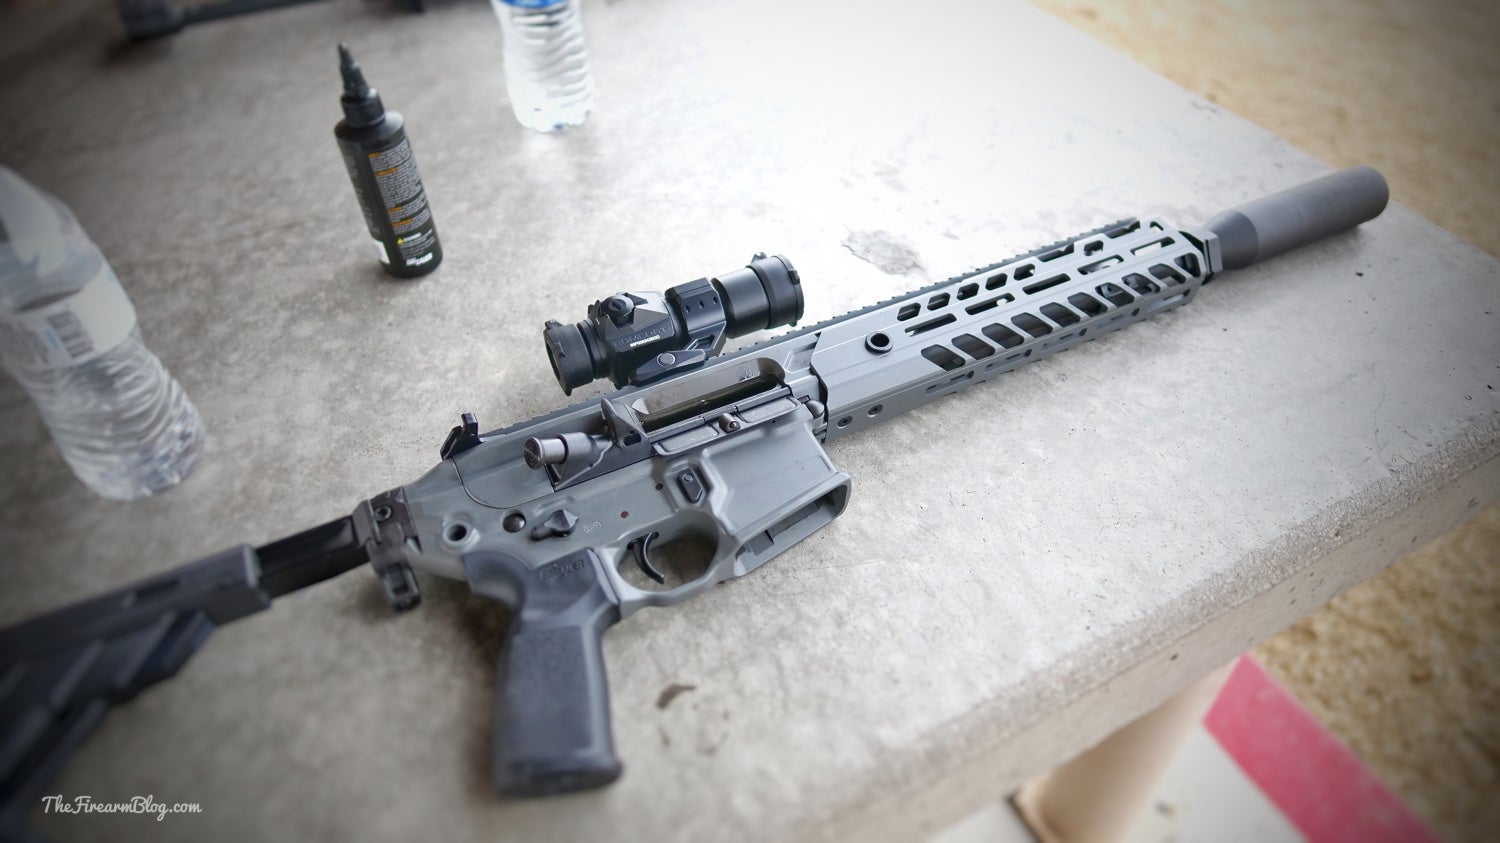 SIG Sauer MCX Virtus with 11.5" barrel in 5.56mm.